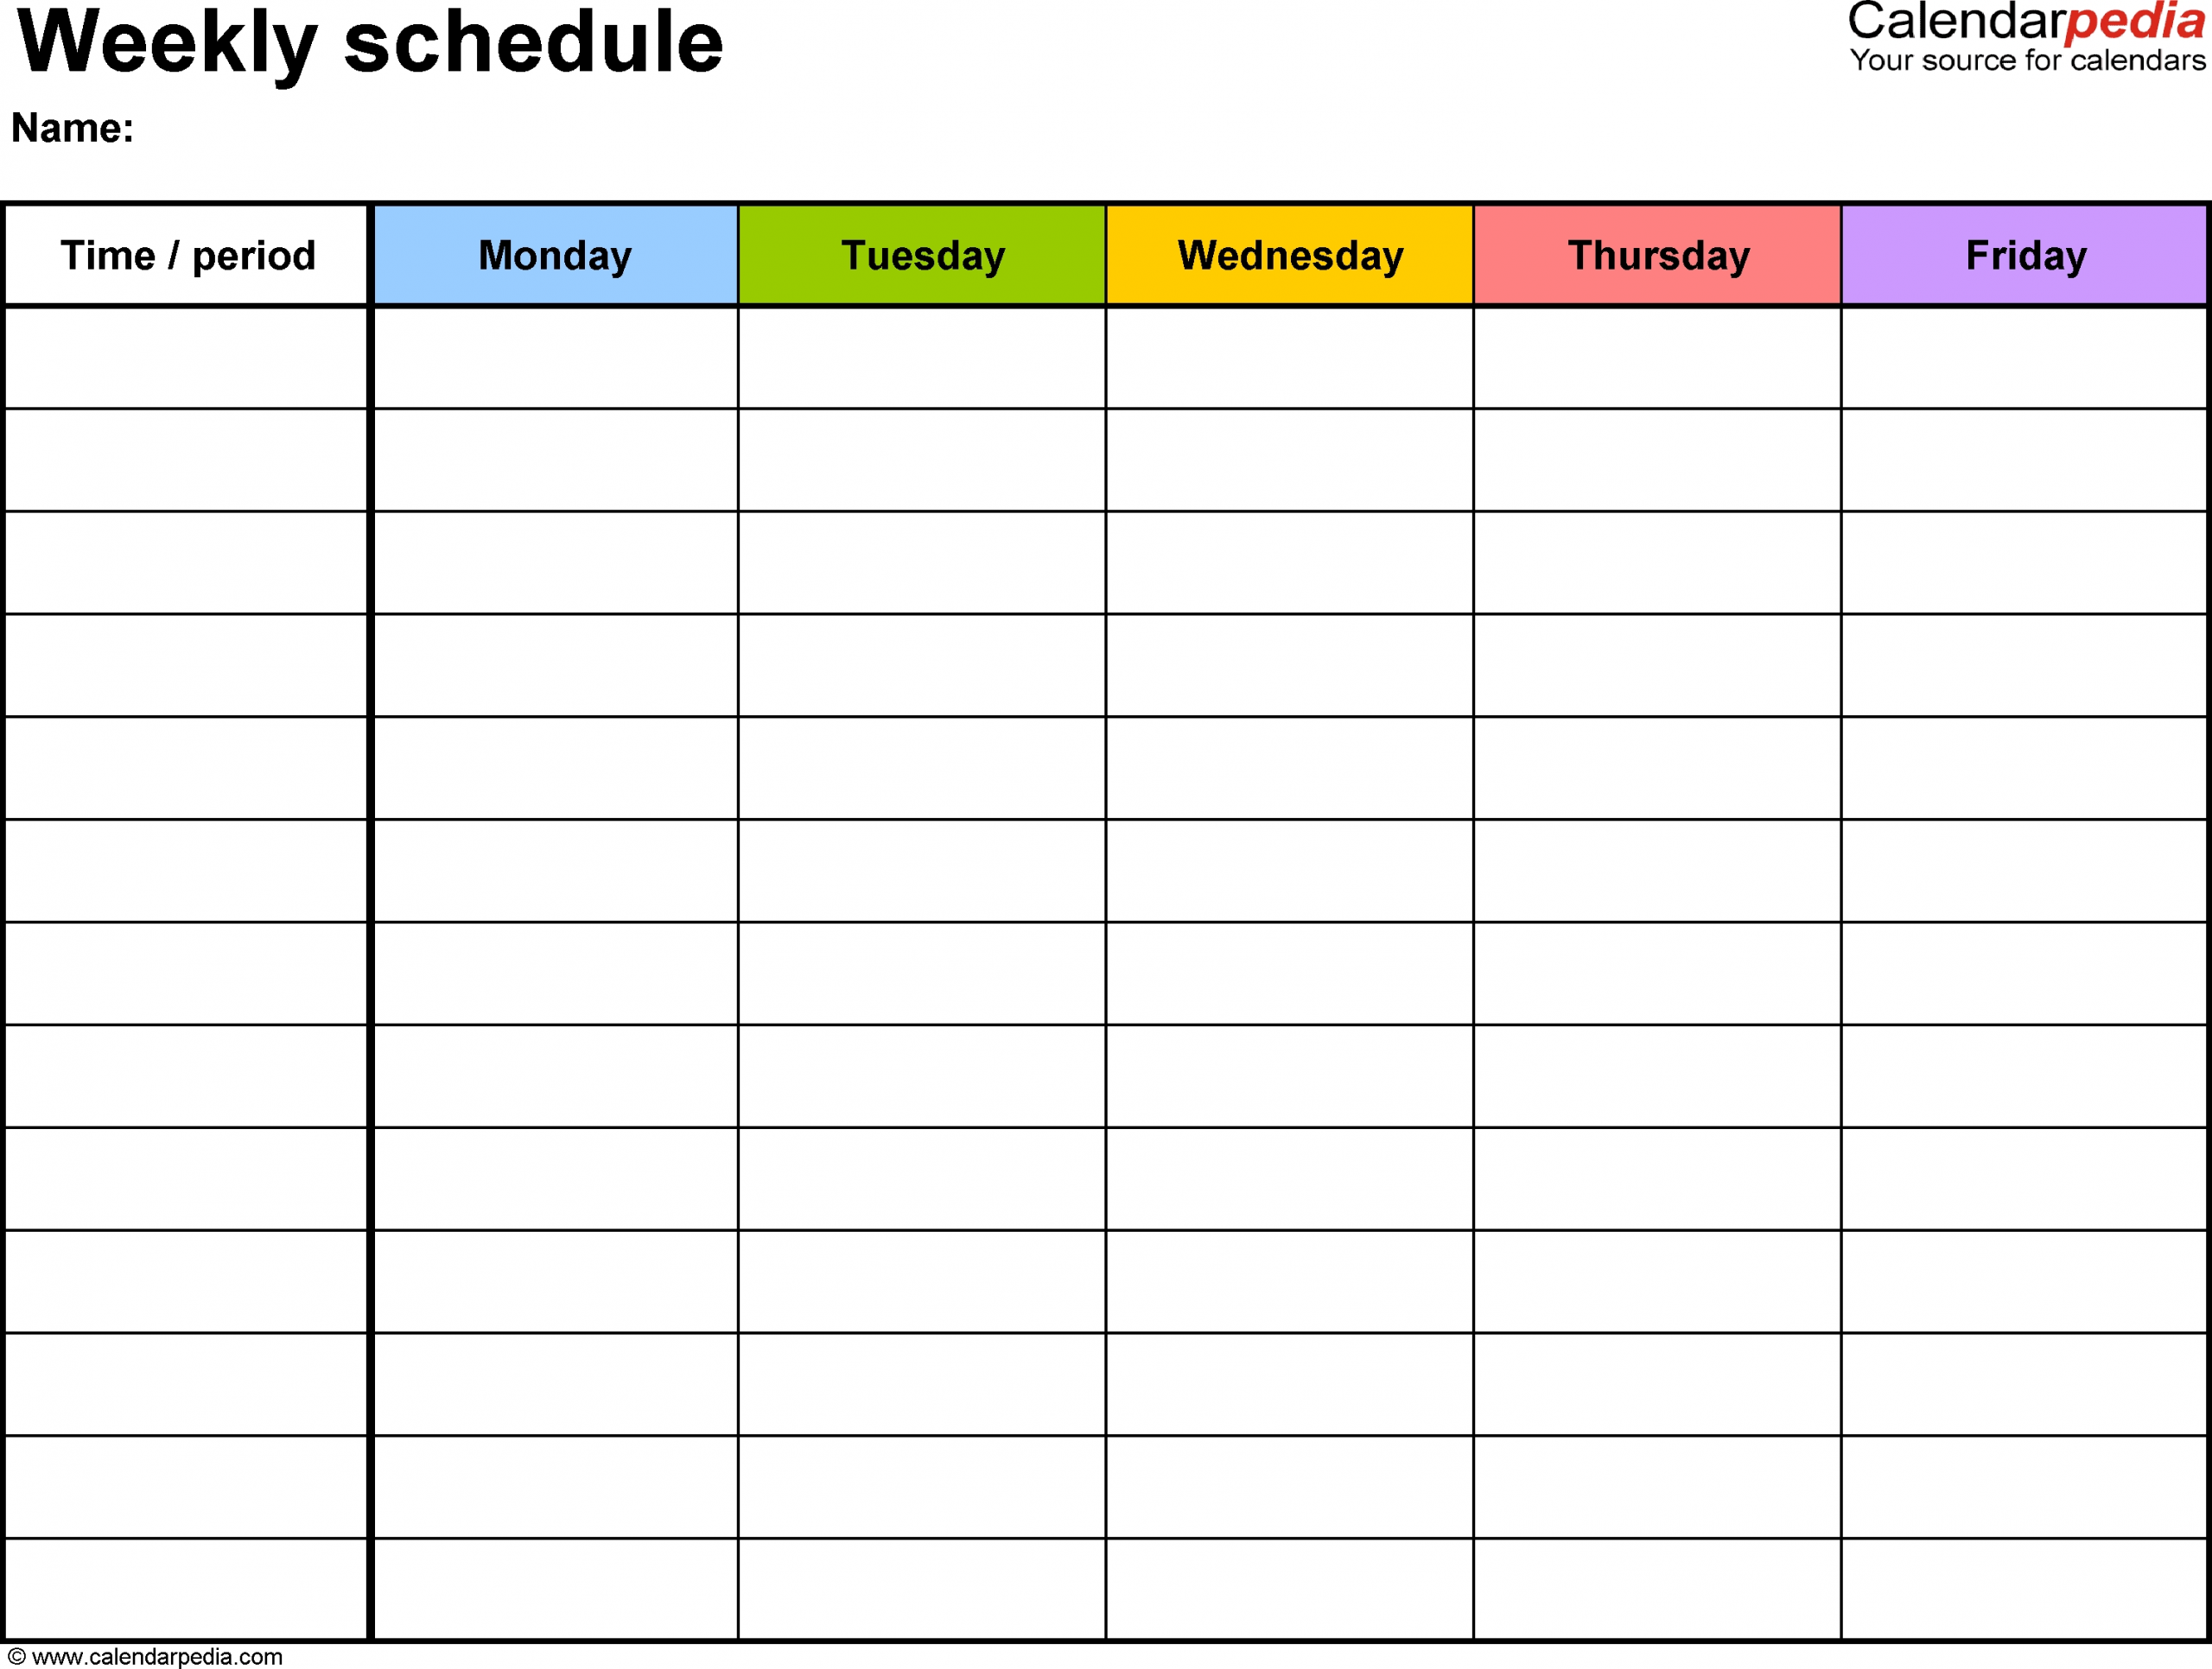 Free Weekly Schedule Templates For Excel - 18 Templates for 5 Day Weekly Planner Template Excel